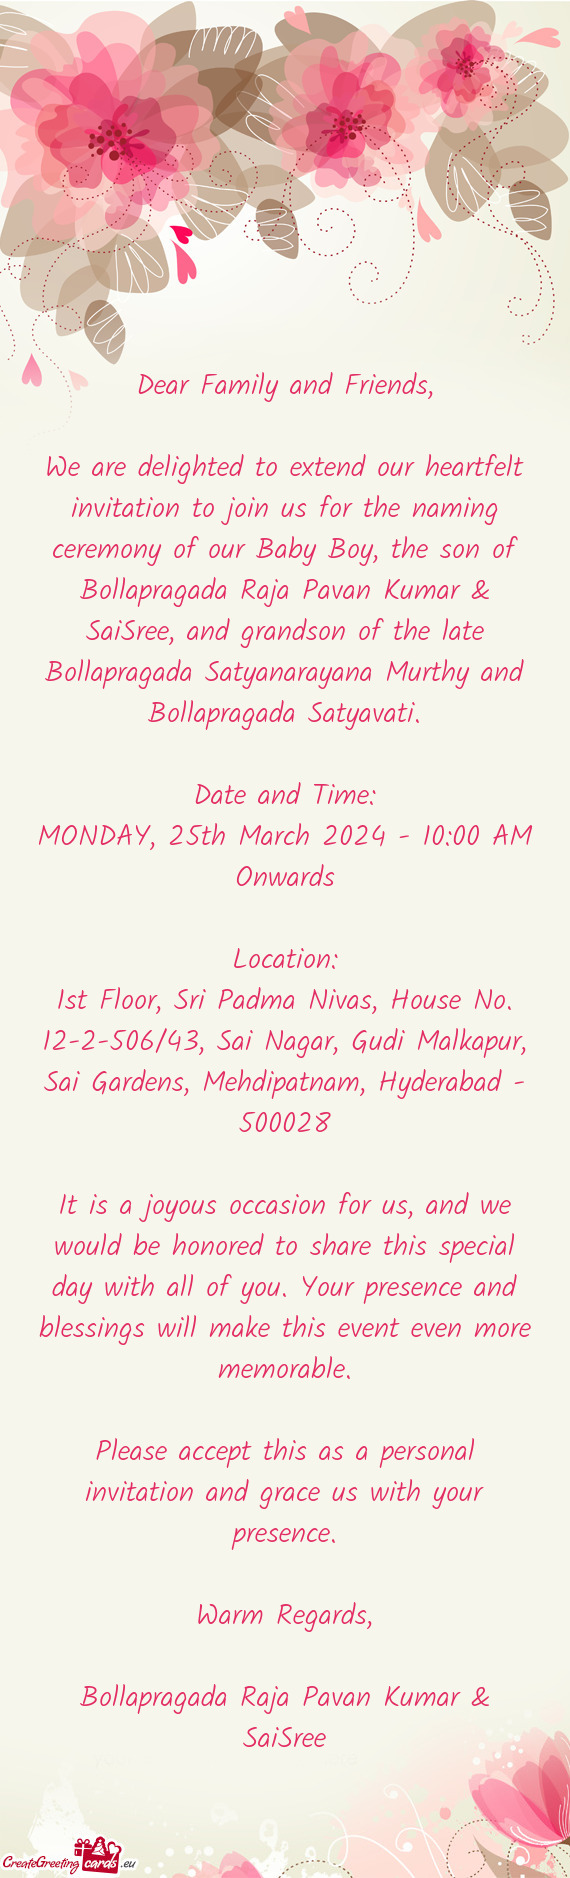 MONDAY, 25th March 2024 - 10:00 AM Onwards